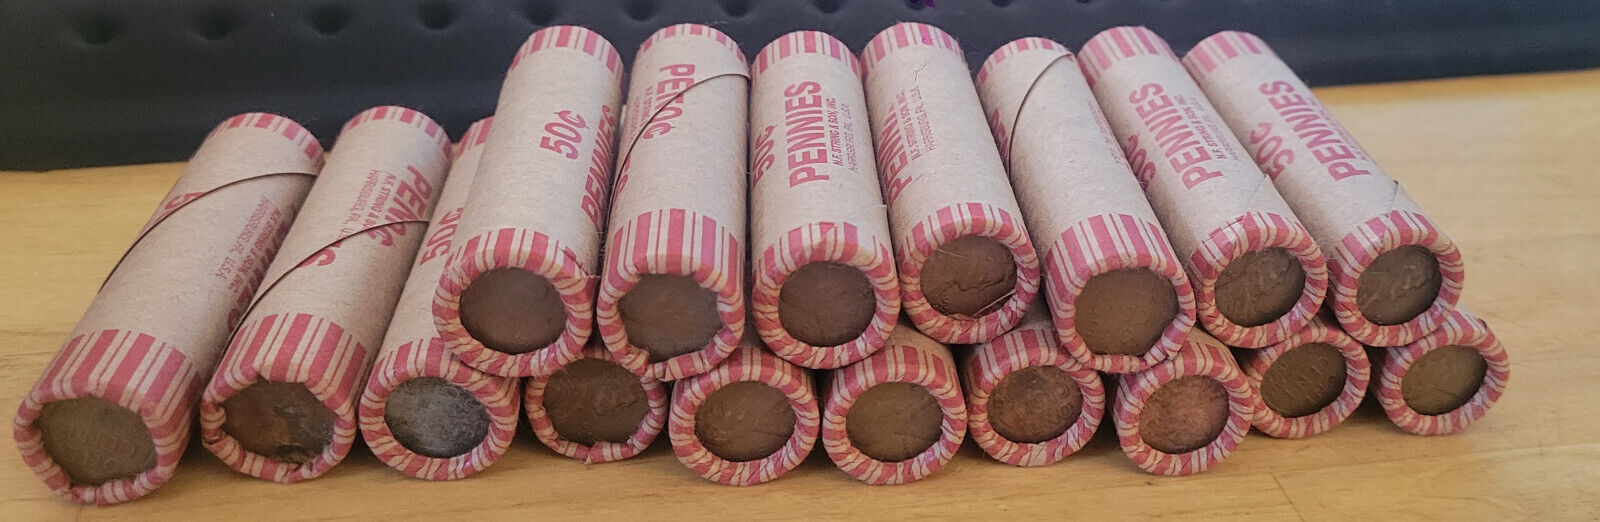 Sealed Wheat Penny Roll Wheat Cent Lot 1909-1958 50 Vintage Coins PDS Steel USA